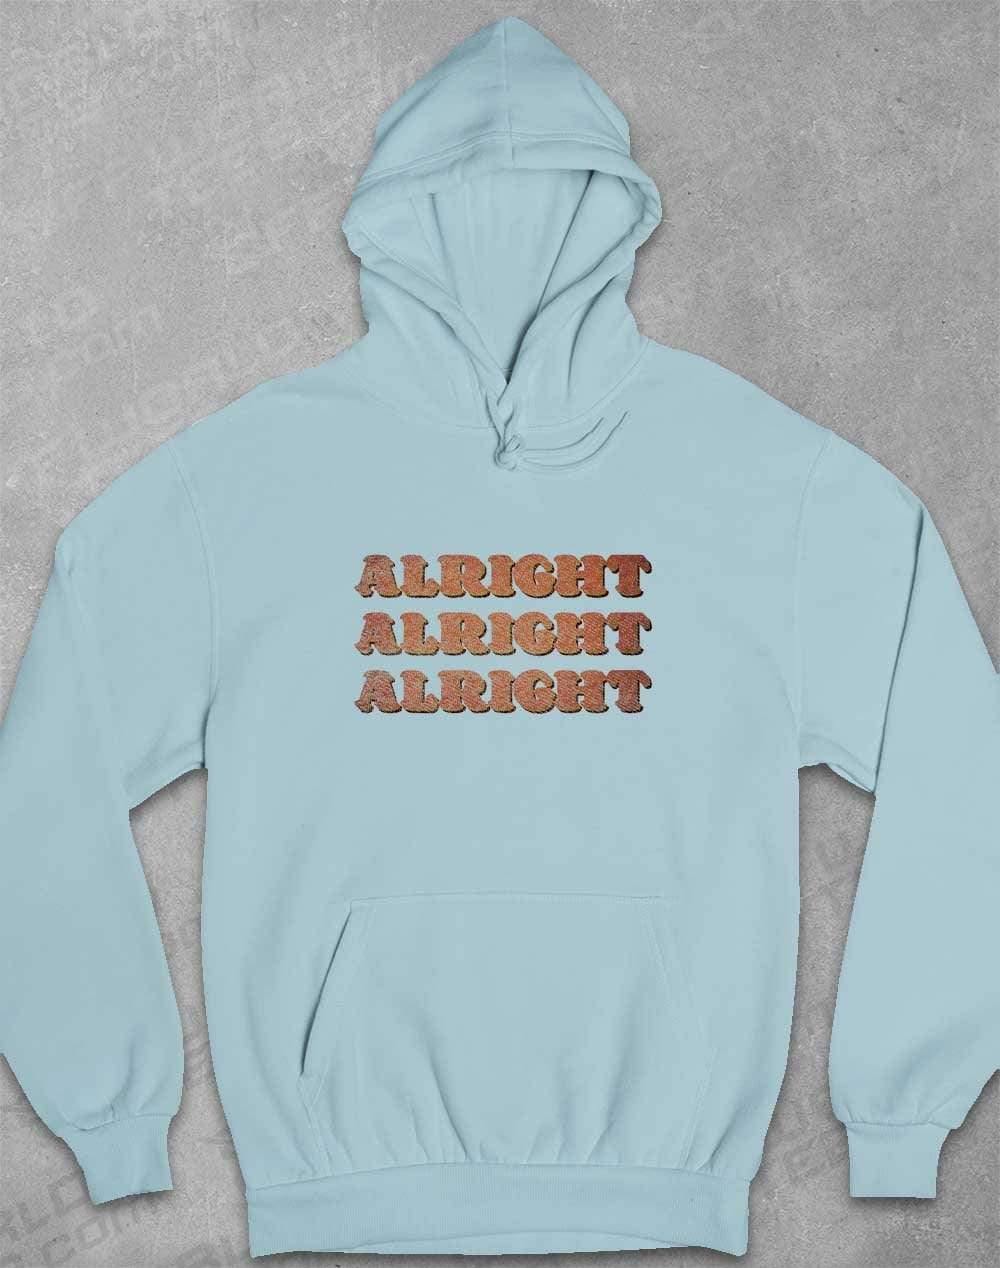 Alright Alright Alright Hoodie XS / Sky Blue  - Off World Tees